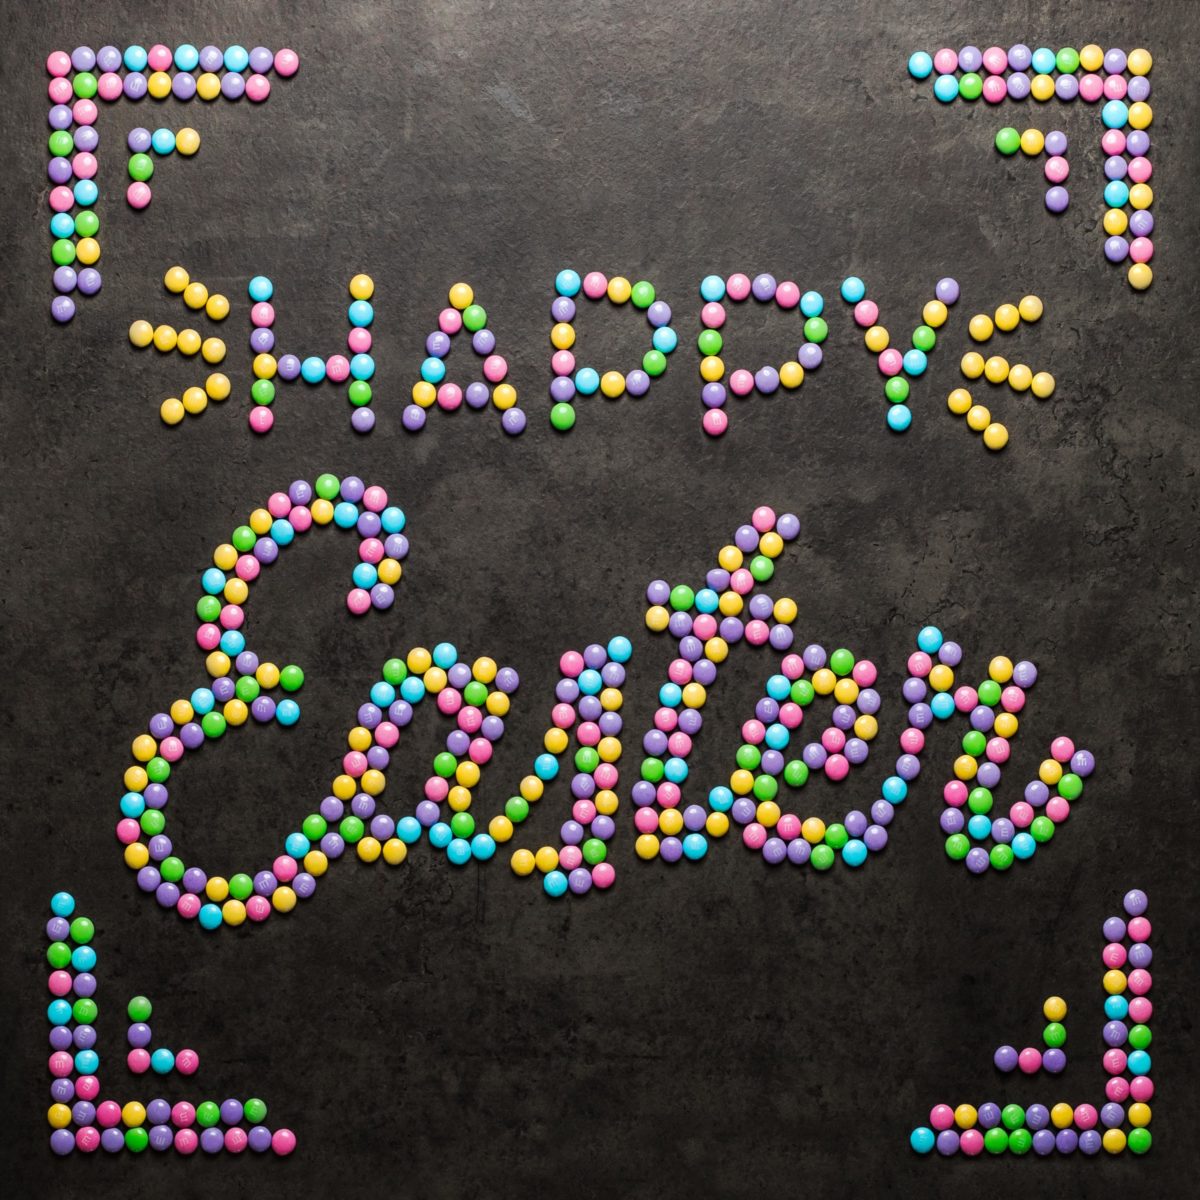 5D4A9746 - Easter - Happy Easter - Food Message Board - 1X1 - HIGH RES